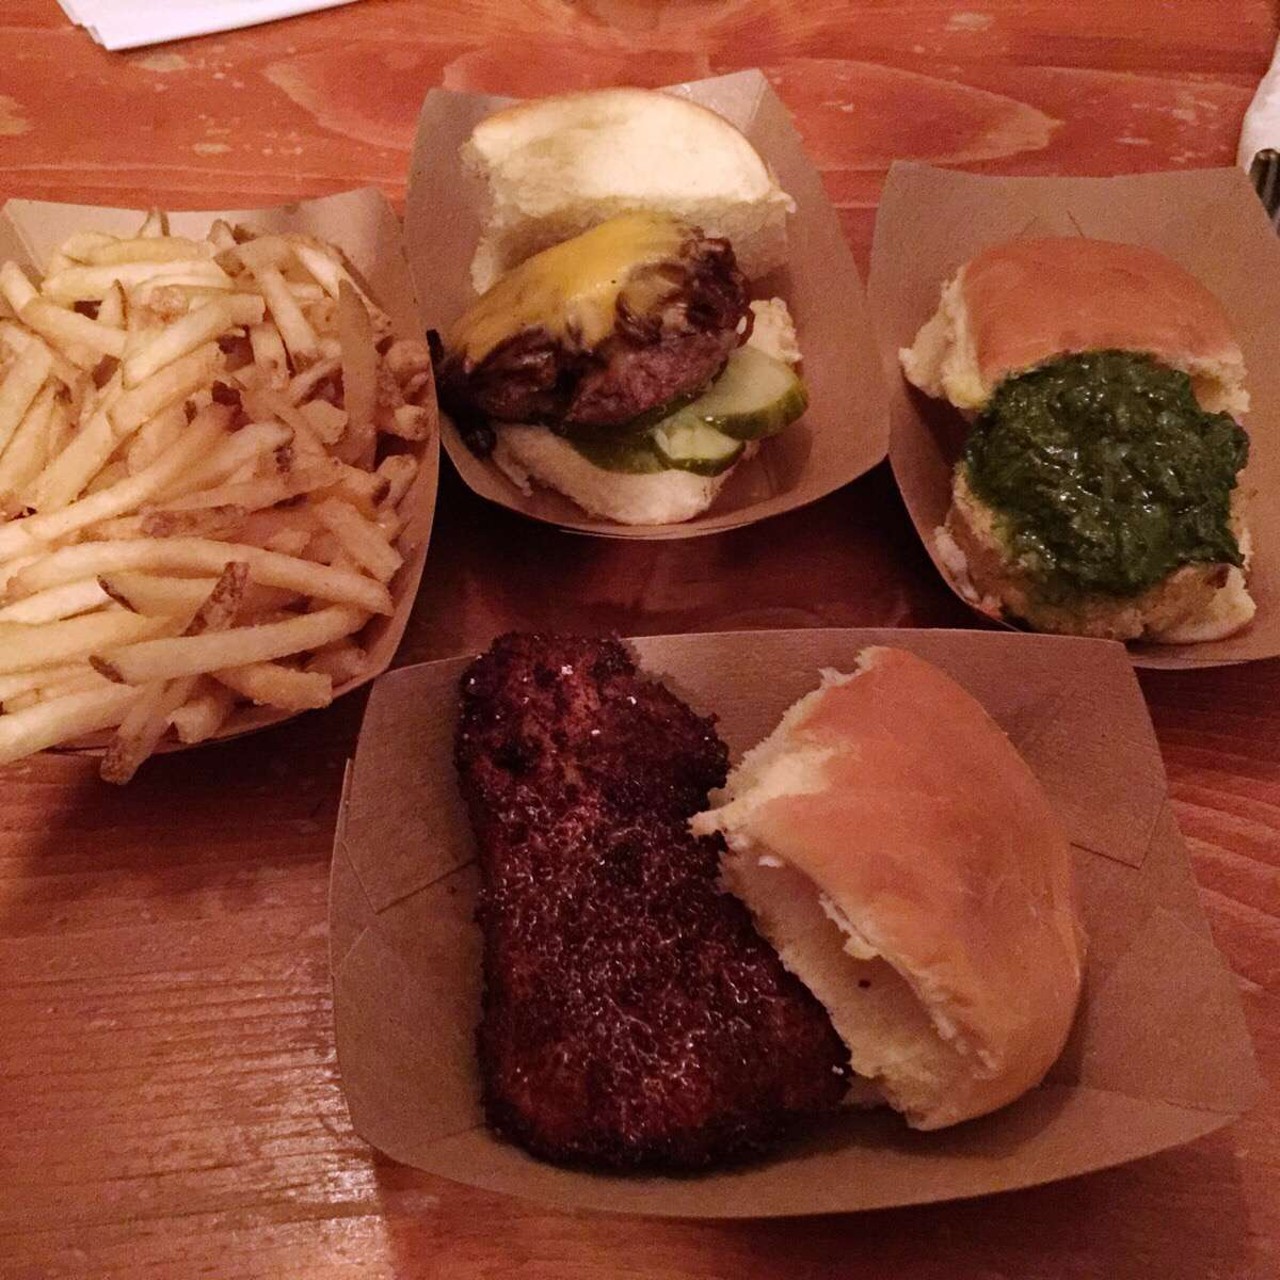 Green Dot Stables - 2200 W Lafayette Blvd 
No introduction needed, having made multiple lists for best eatery in Detroit, quintessential Detroit. Green Dot Stables offers an impressive amount of sliders, usually in the $2-4 price range, now combine that with the cheap AF booze, you got a winner baby!
(Photo via Zomato, Caitlin)